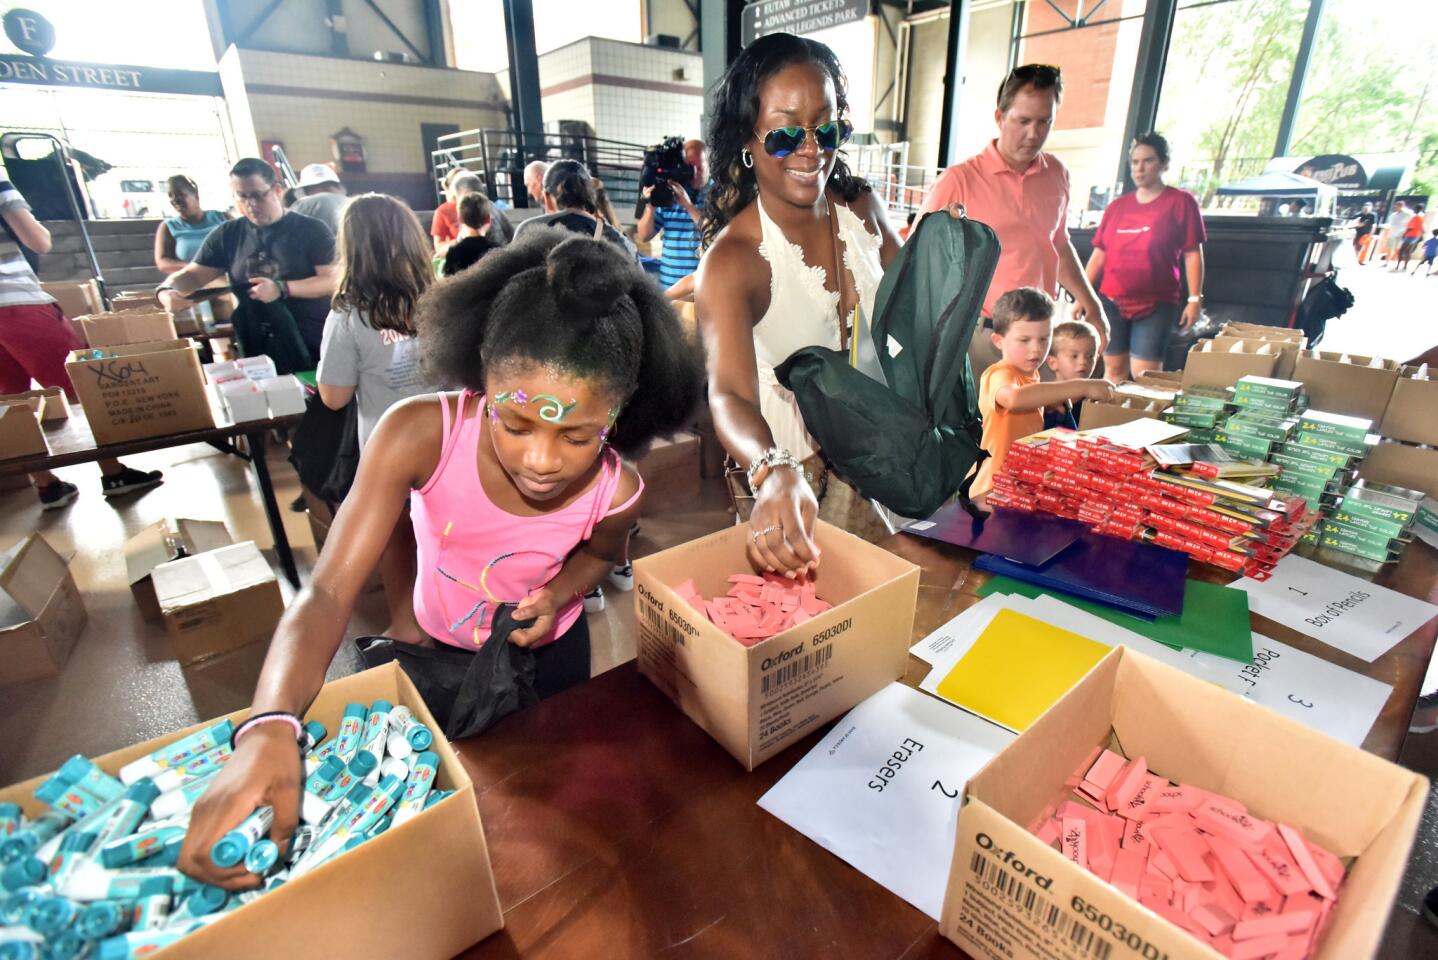 Lina Smith, 10, left, and her mother, Kenesha Smith of Owings Mills, a Bank of America employee, joined several hundred Bank of America volunteers who came with their families to Oriole Park at Camden Yards to pack 1,000 backpacks with school supplies for Baltimore City school students. The backpacks will be delivered to Armistead Gardens and Sandton-Winchester Achievement Academy on Monday.